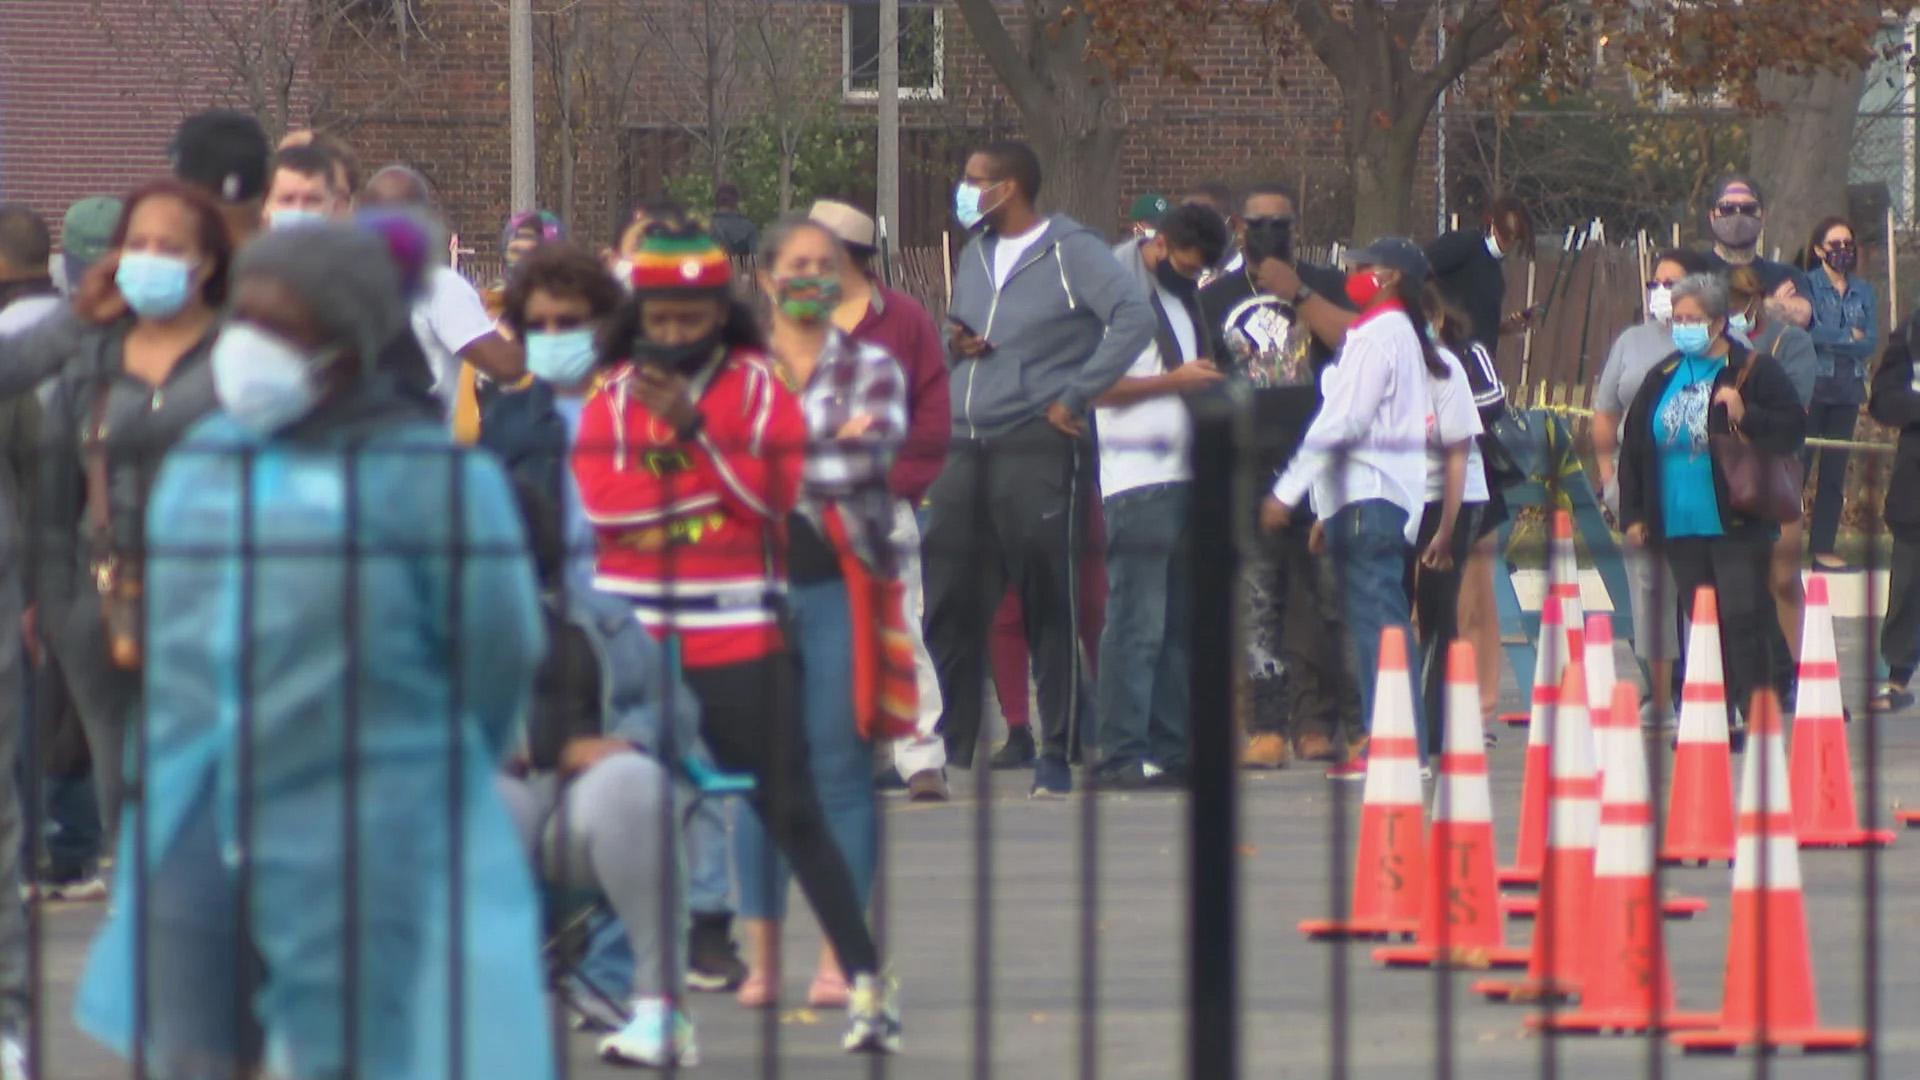 People wait in line for COVID-19 tests in Chicago. (WTTW News)